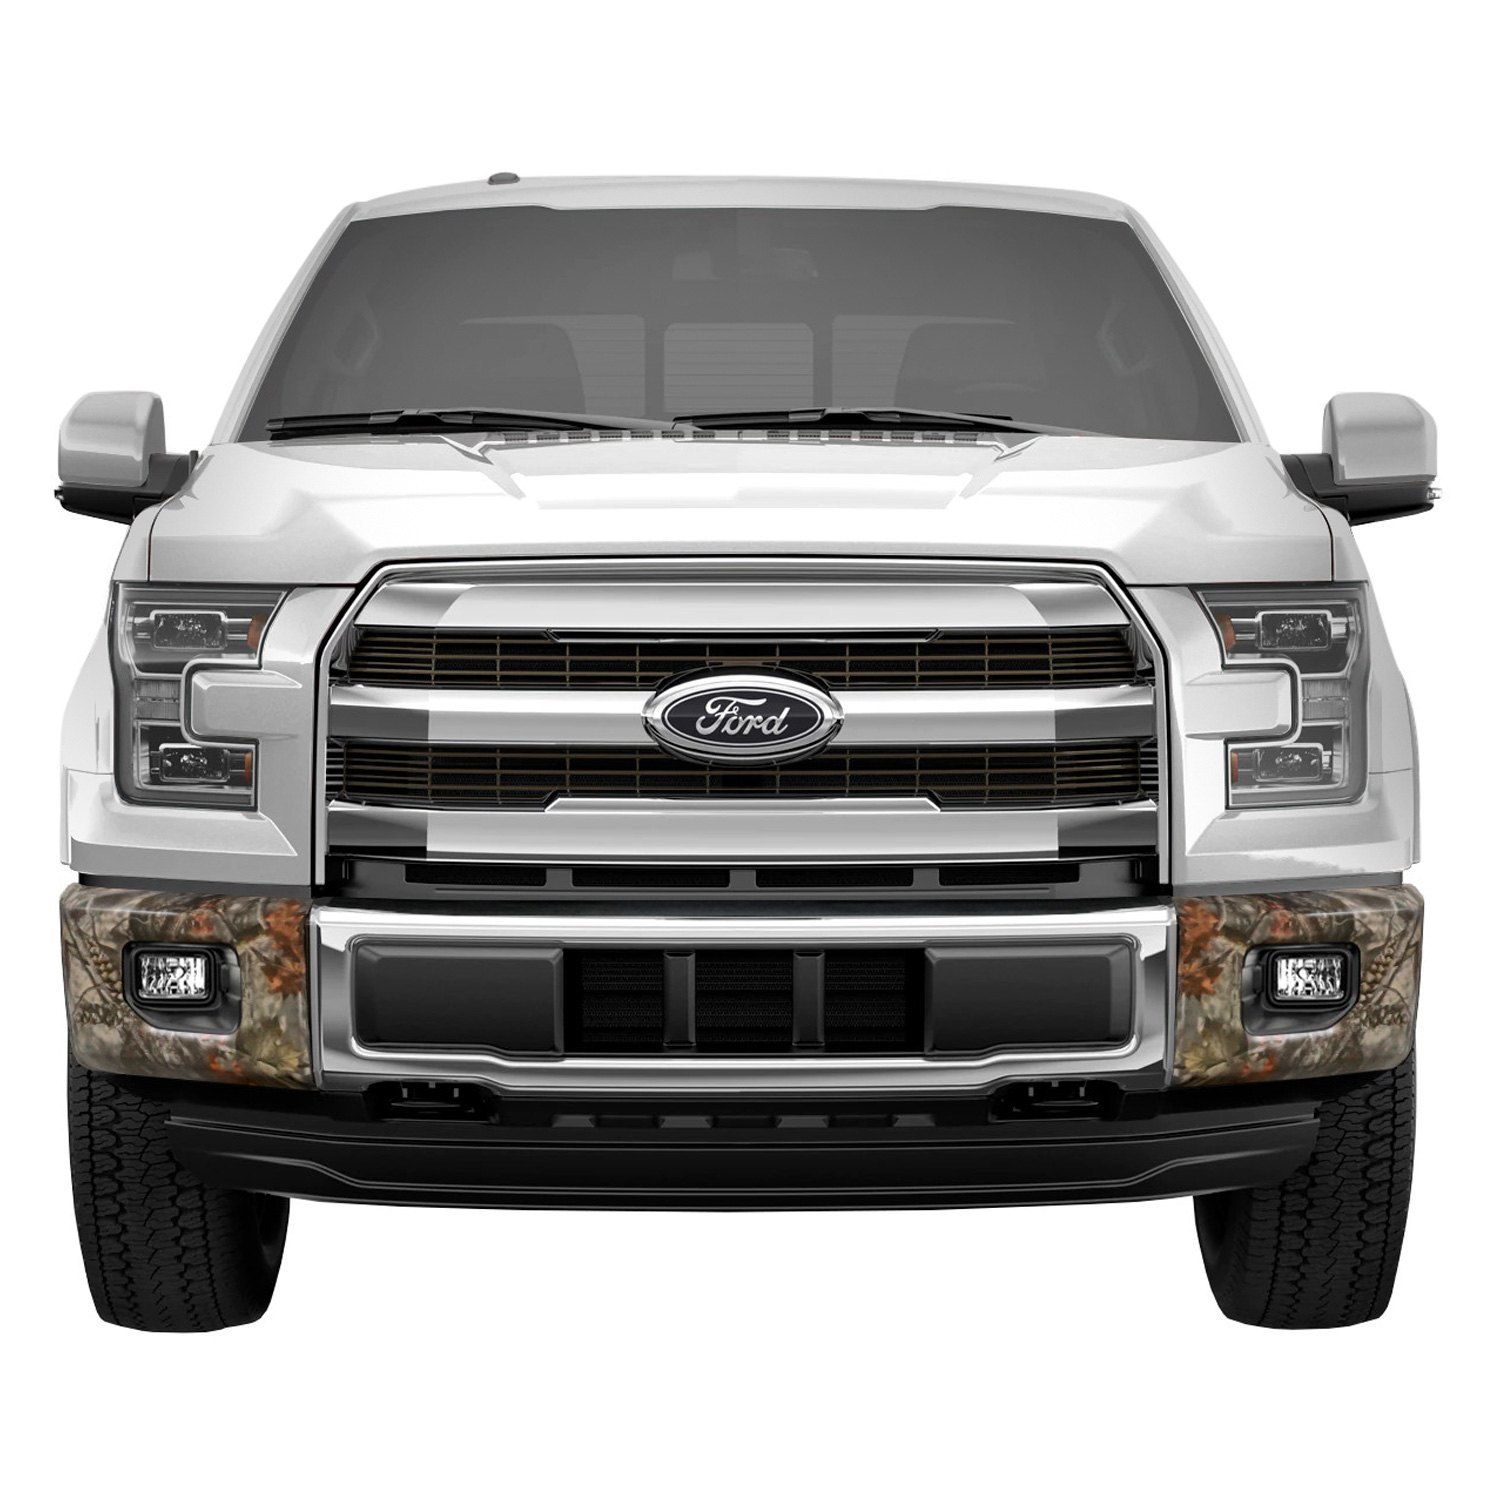 For Ford F-150 2015-2017 BumperShellz DF0206 Camouflage Front Bumper Side Covers | eBay 2017 Ford F 150 Front Bumper Removal